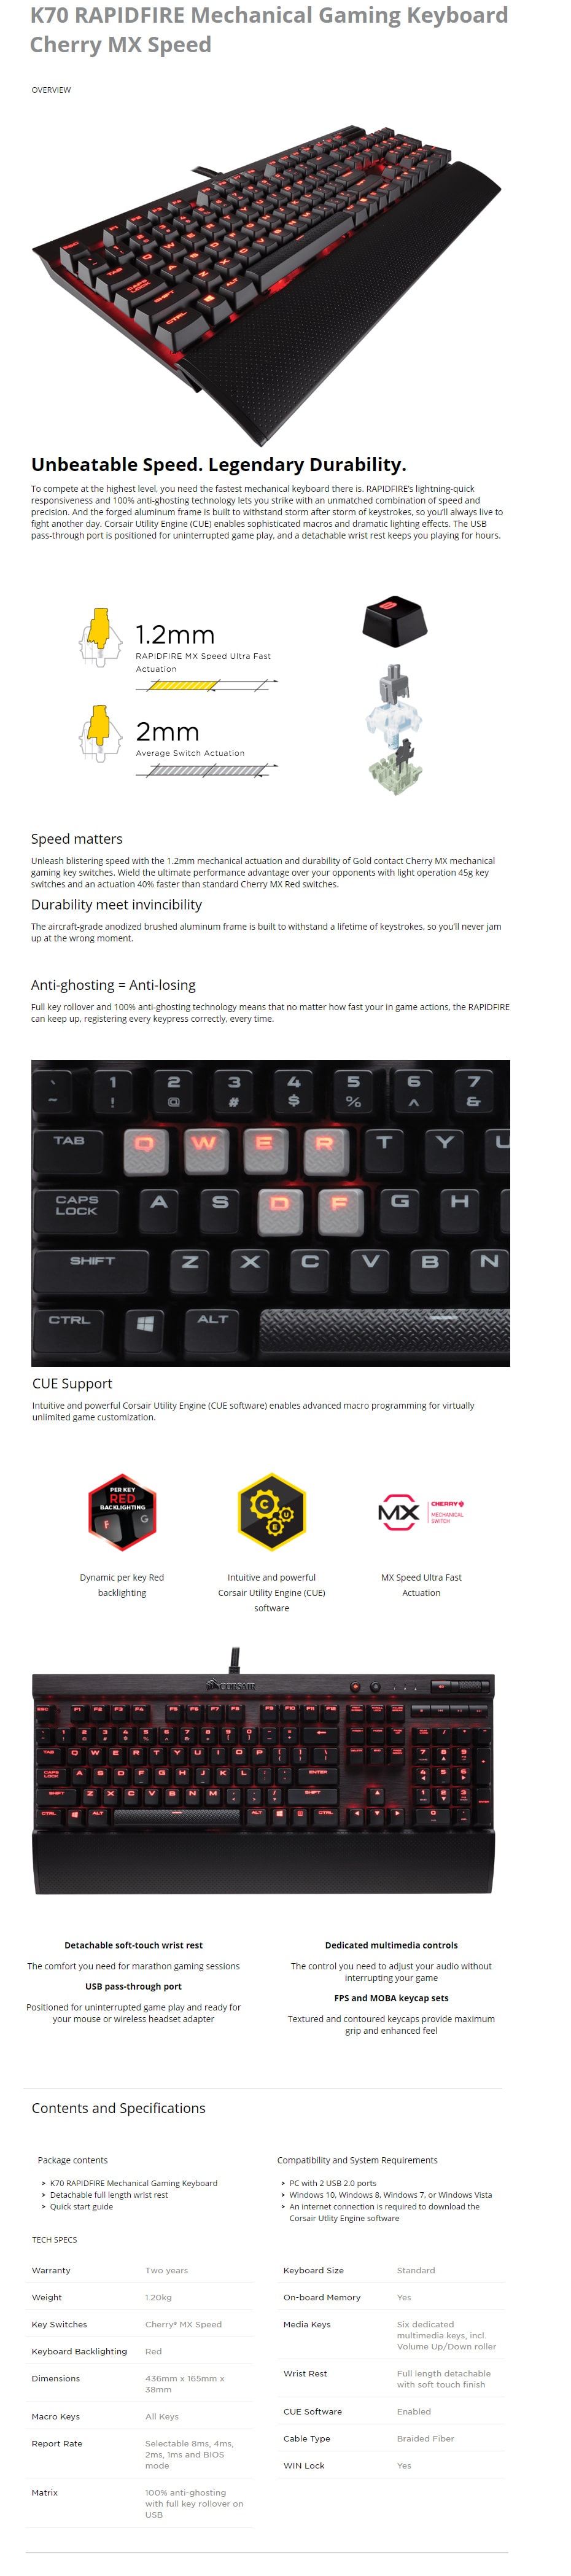 Corsair K70 Rapidfire Mechanical Gaming Keyboard - Cherry MX Speed features